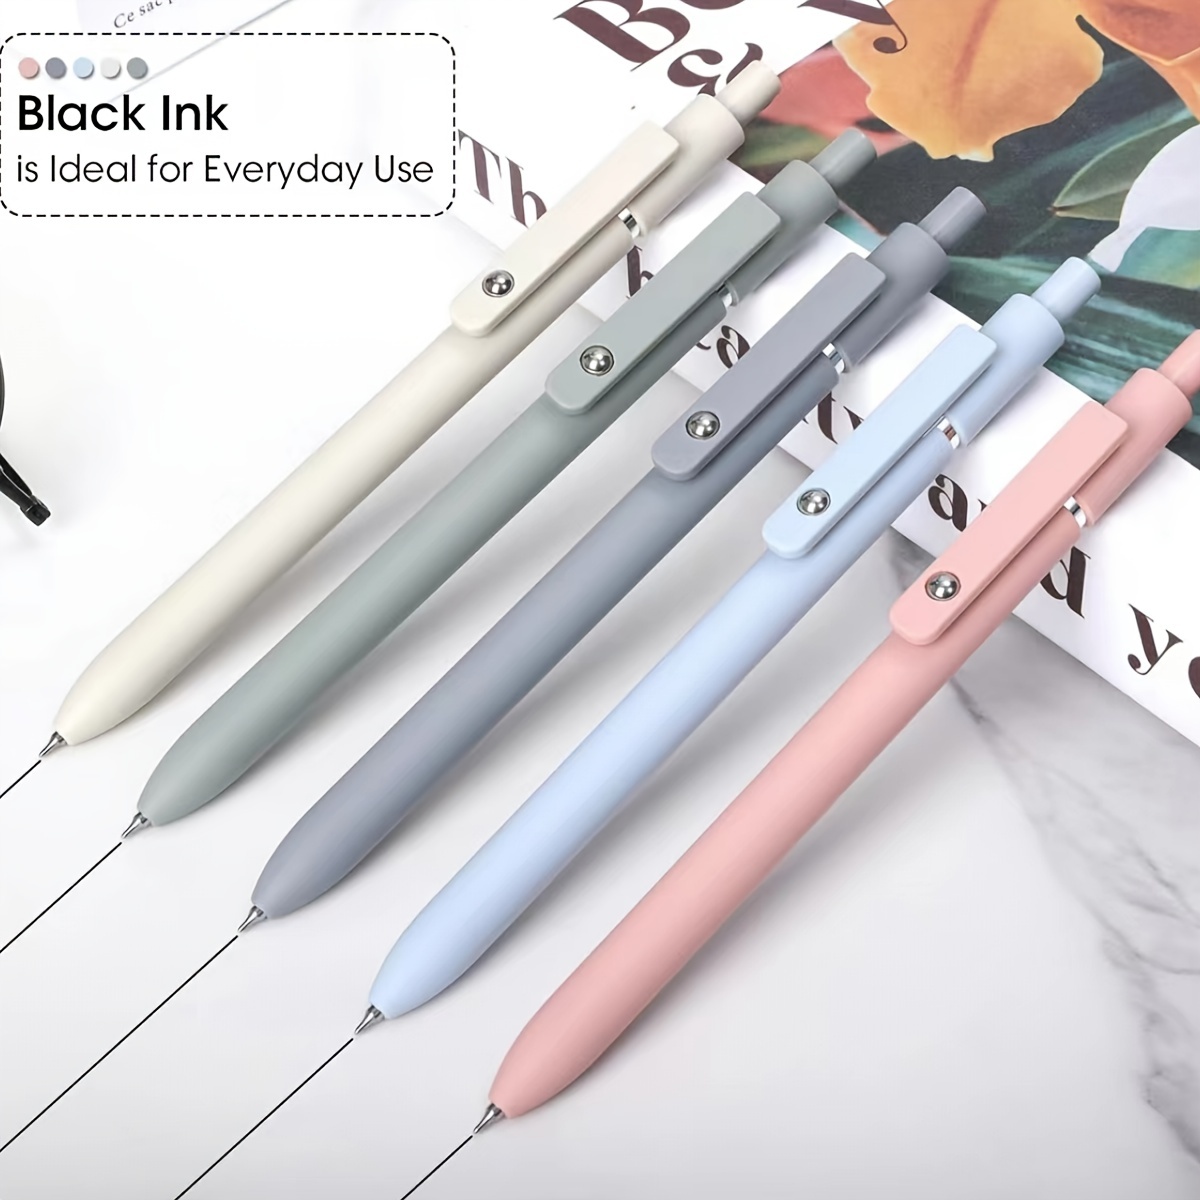 

5pcs Gel Pen Quick-drying Ink Pen Fine Tip High-end Retractable Ballpoint Gel Pen Black Ink Smooth Writing Suitable For School Office